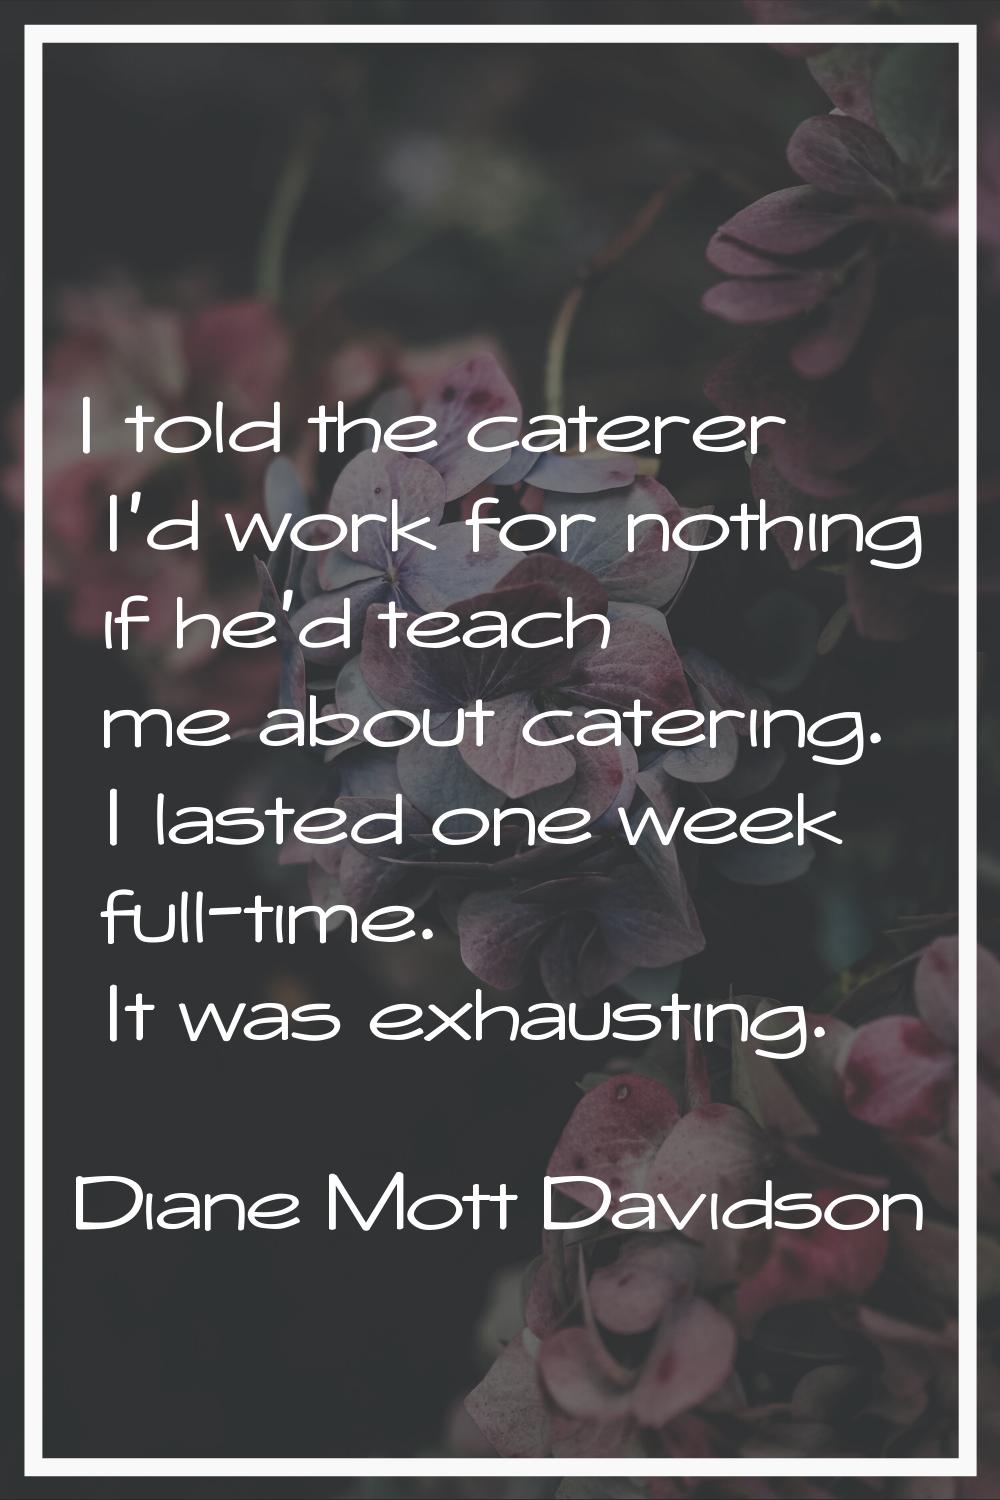 I told the caterer I'd work for nothing if he'd teach me about catering. I lasted one week full-tim